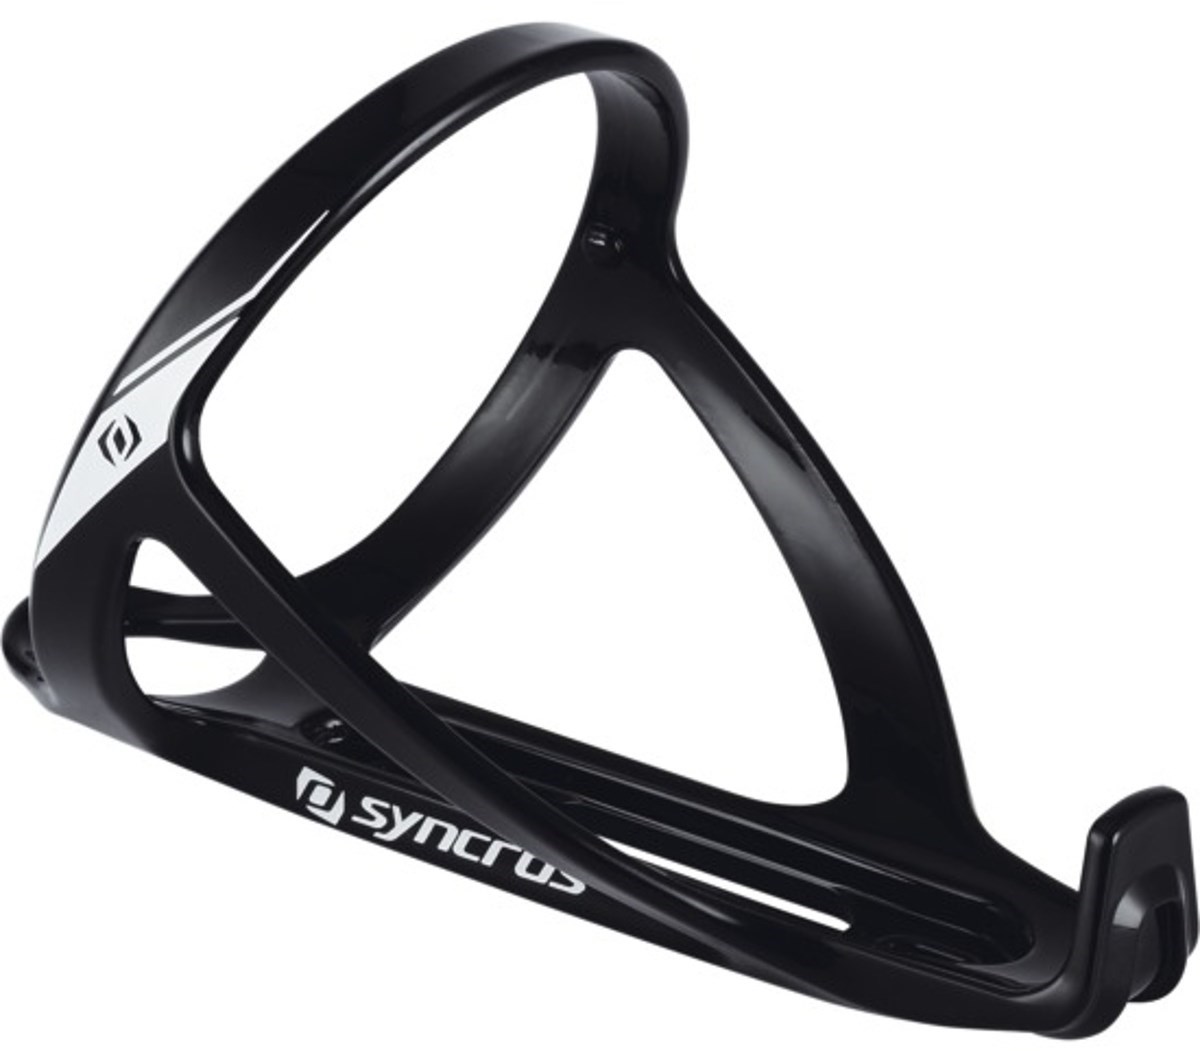 Syncros Composite 2.0 Bottle Cage product image